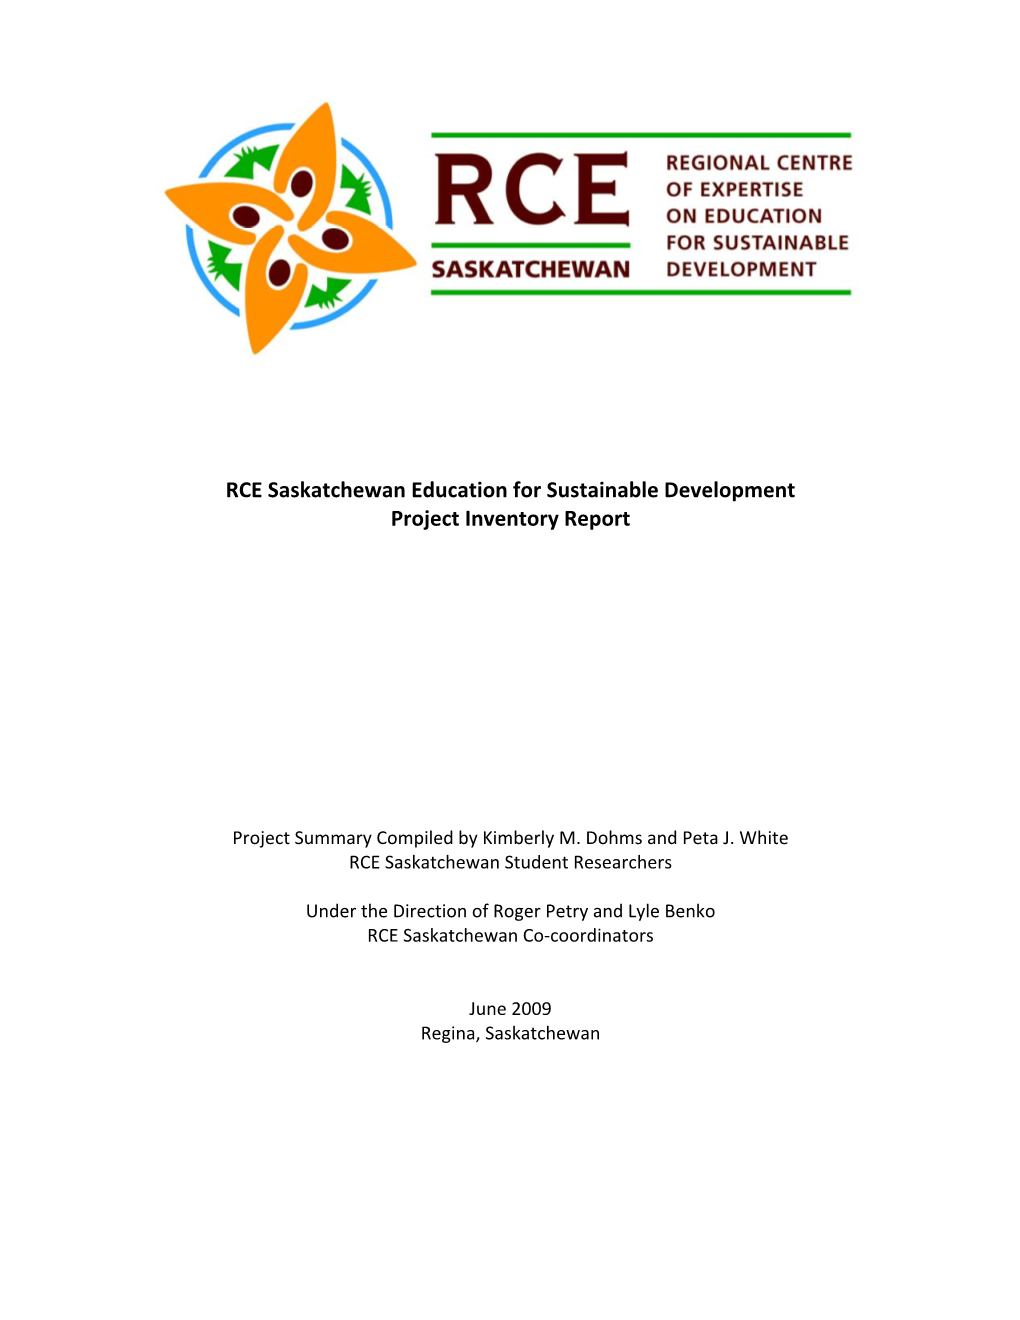 RCE Saskatchewan Education for Sustainable Development Project Inventory Report